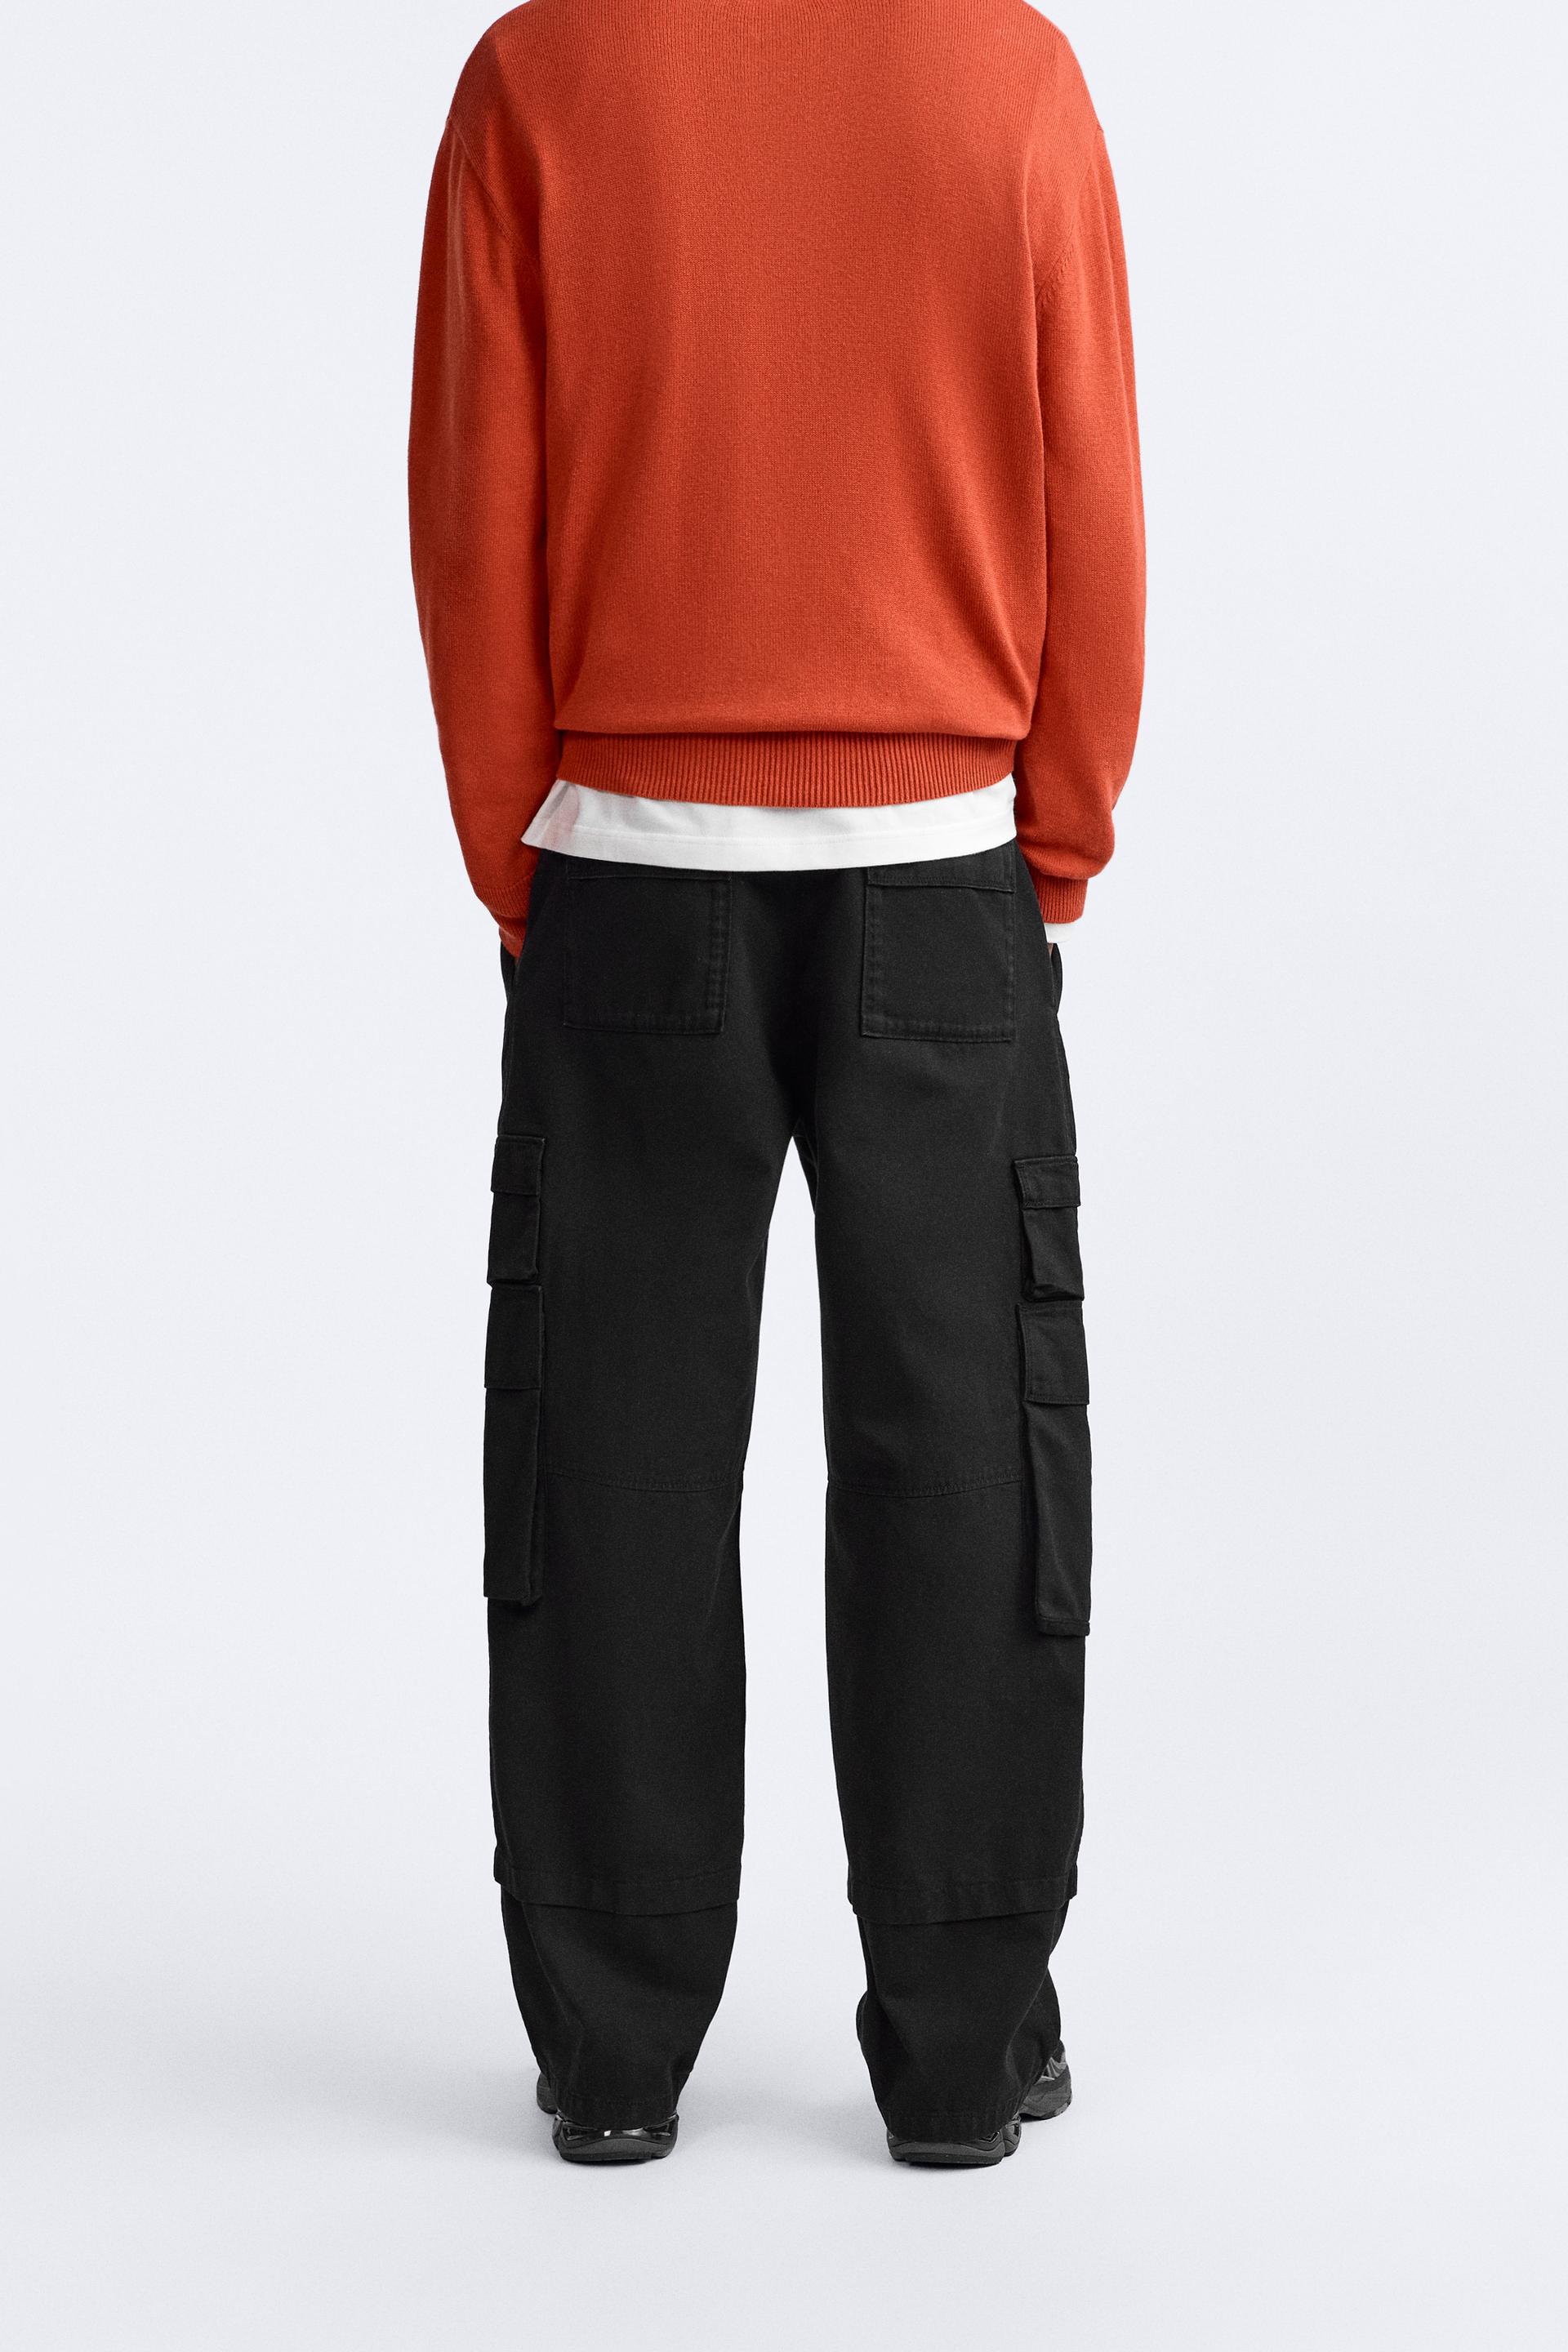 Cute in Cargo: Zara Cargo Trousers, 13 New Arrivals From Zara That We're  Coveting For November